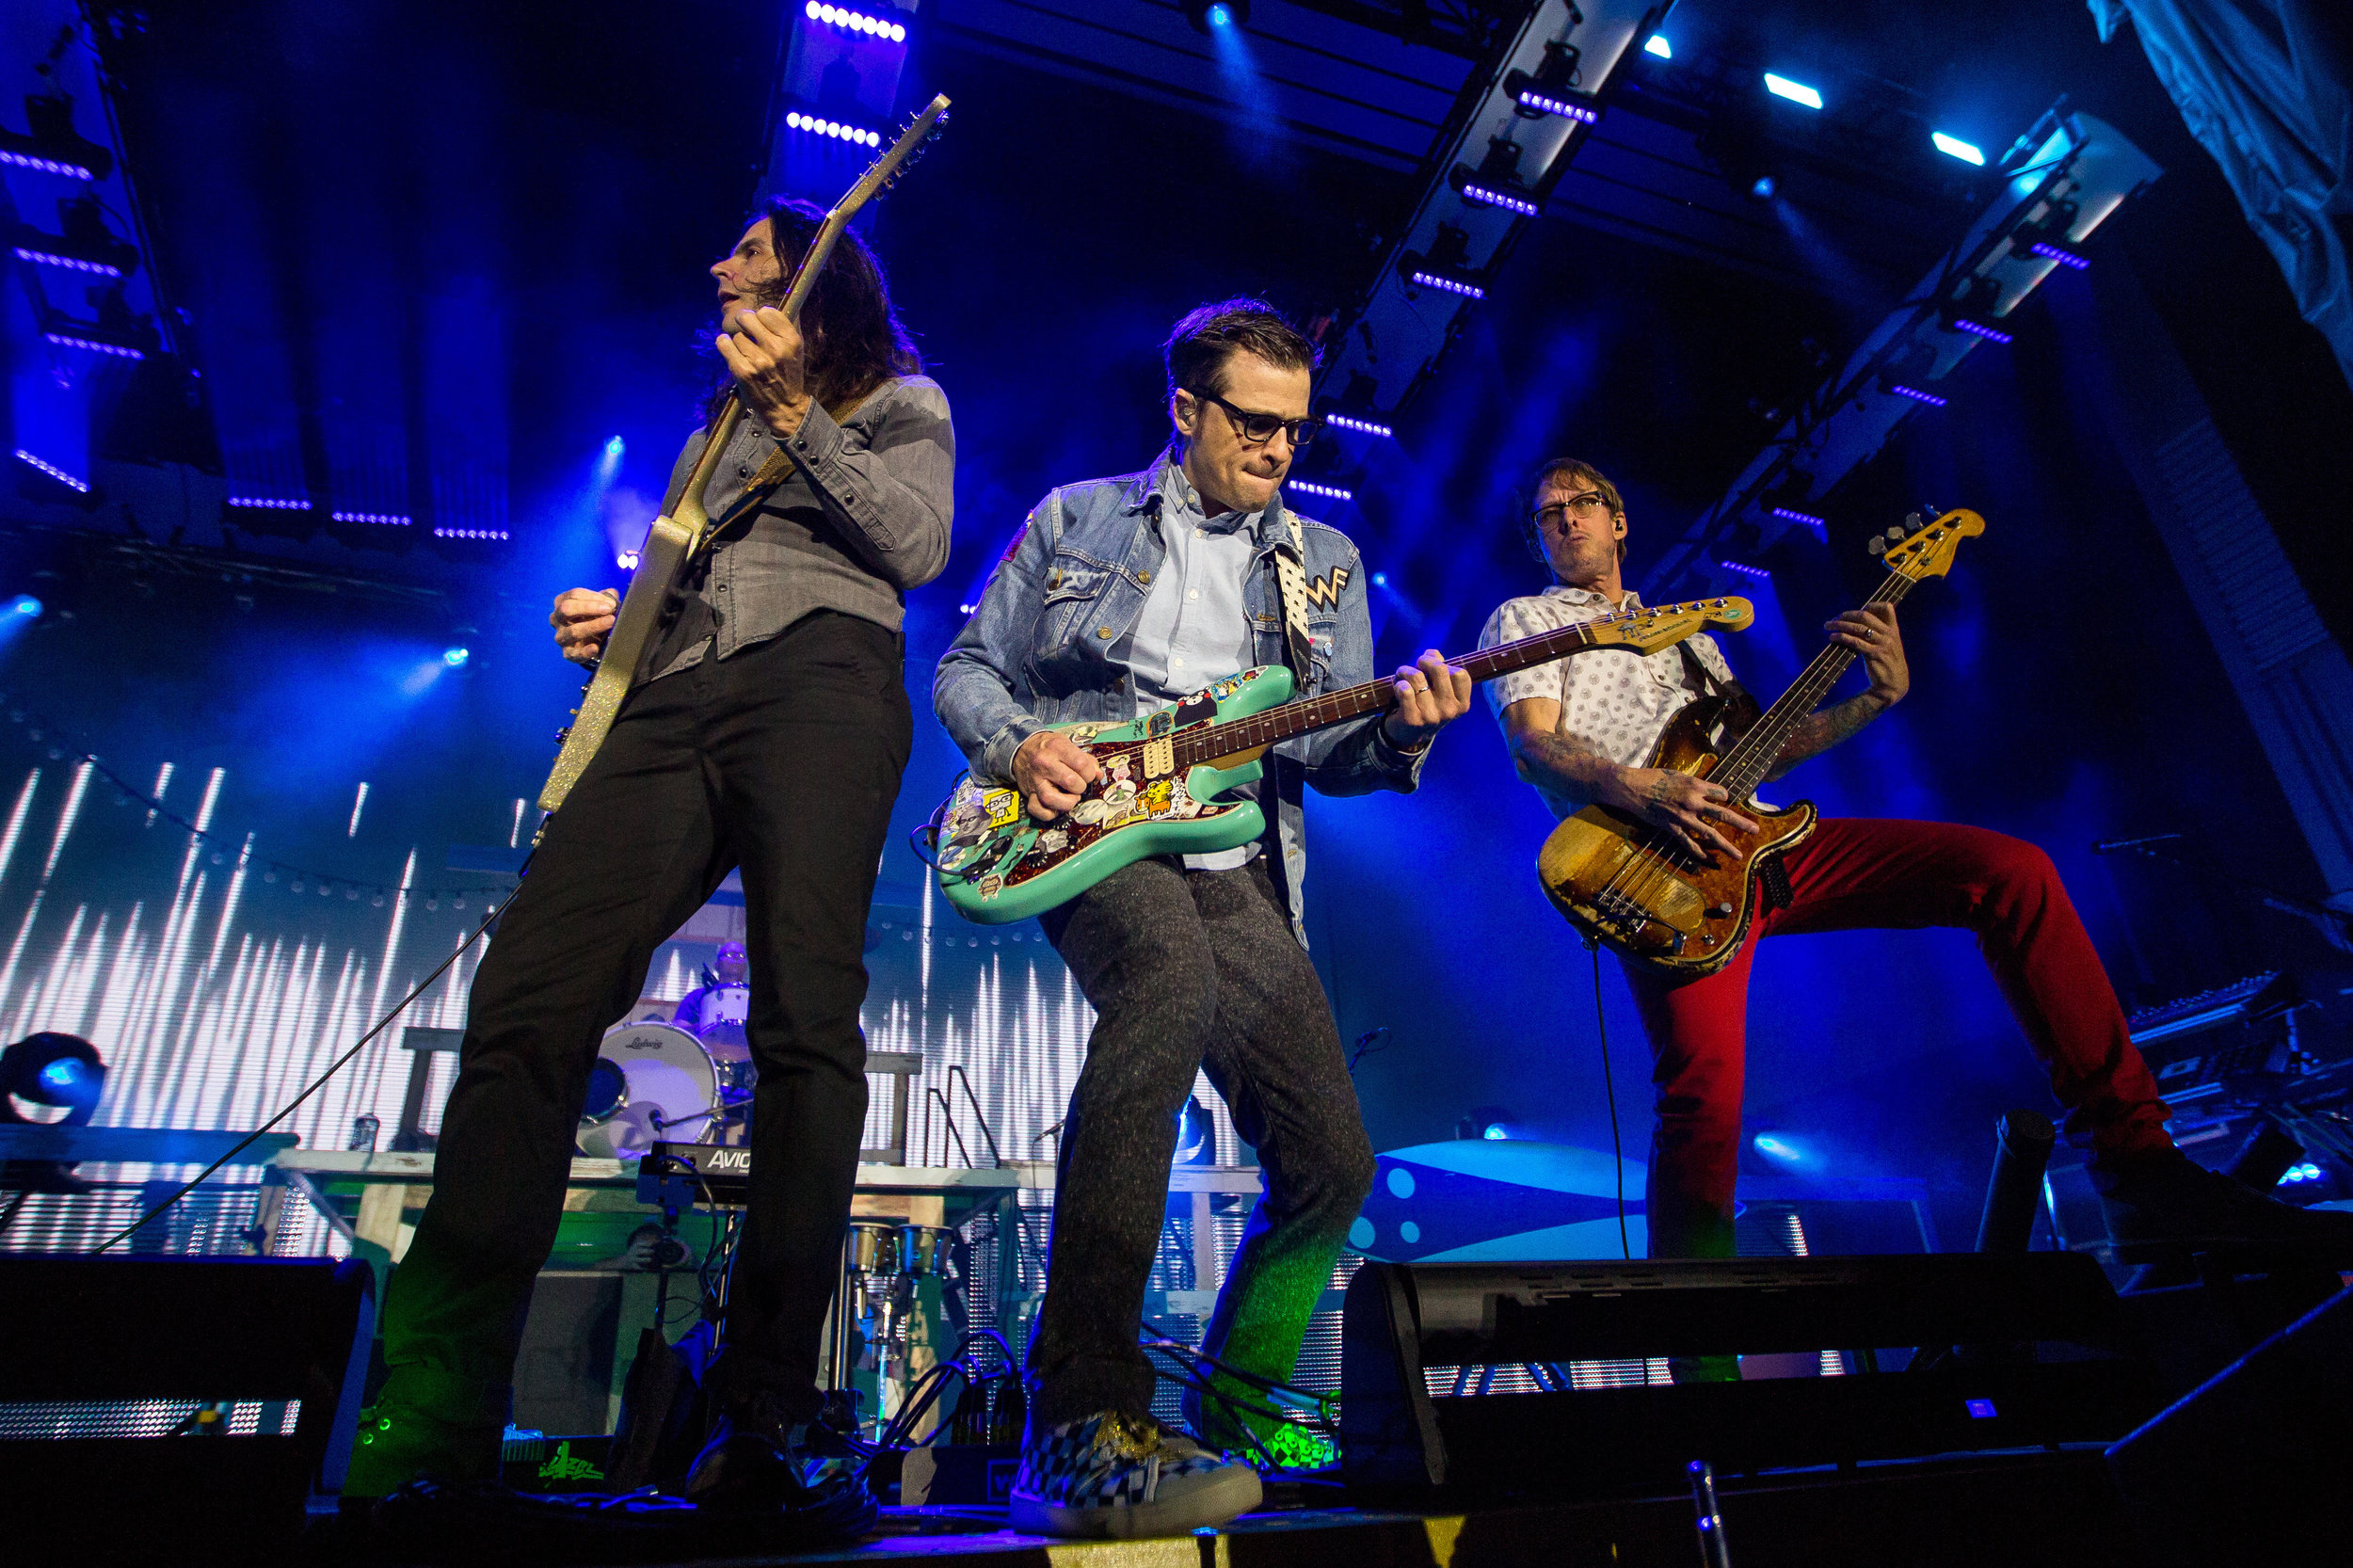  Weezer performs together on center stage at Stage AE in Pittsburgh on Sunday night.  